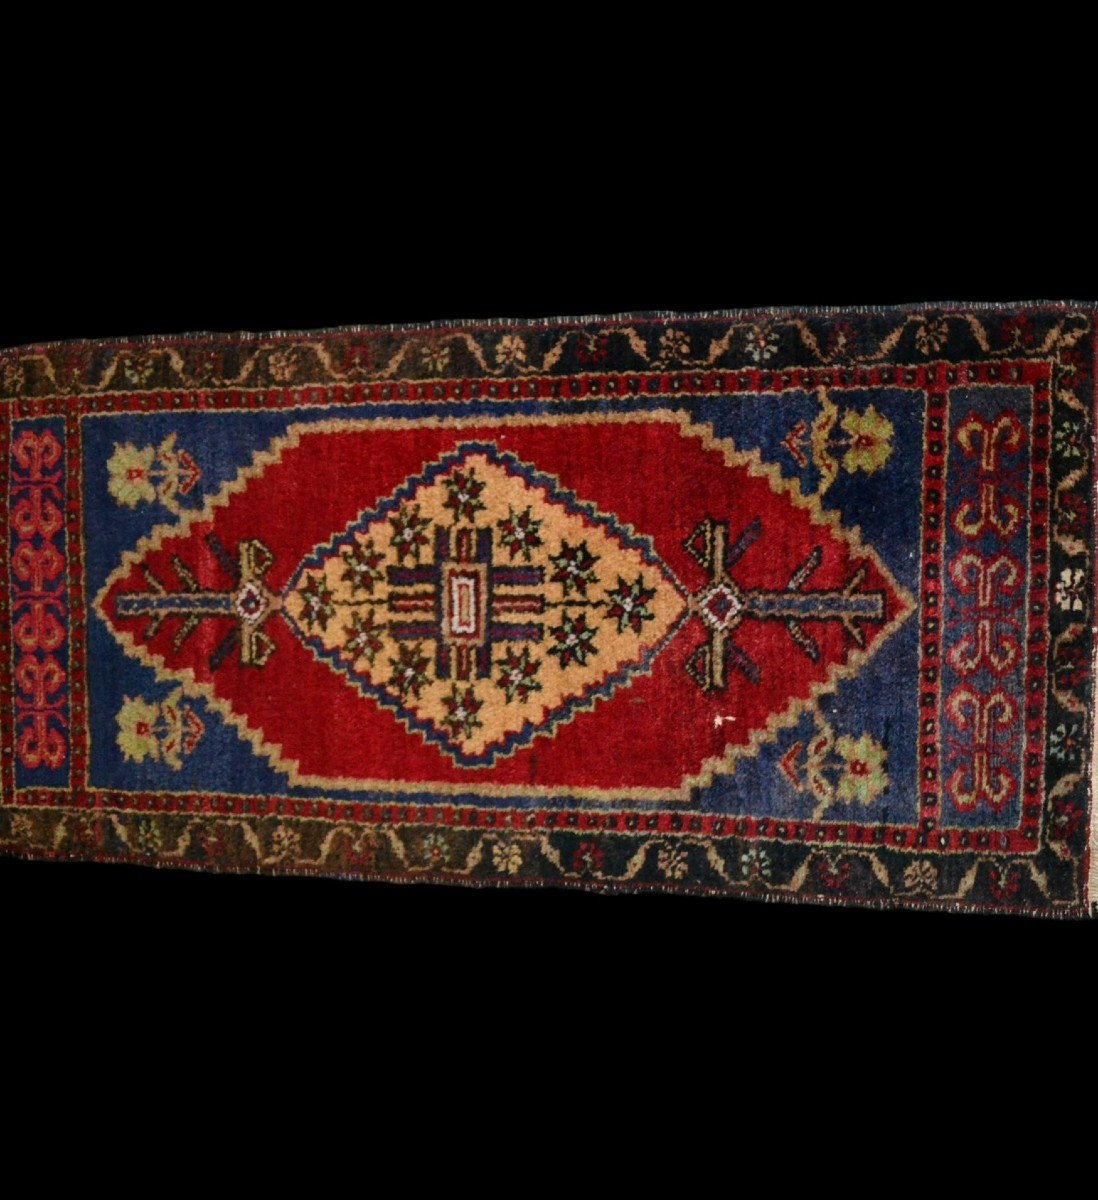 Yastik Around 1950, 51 Cm X 109 Cm, Hand-knotted Wool In Turkey, Welcome Mat, In Good Condition-photo-3